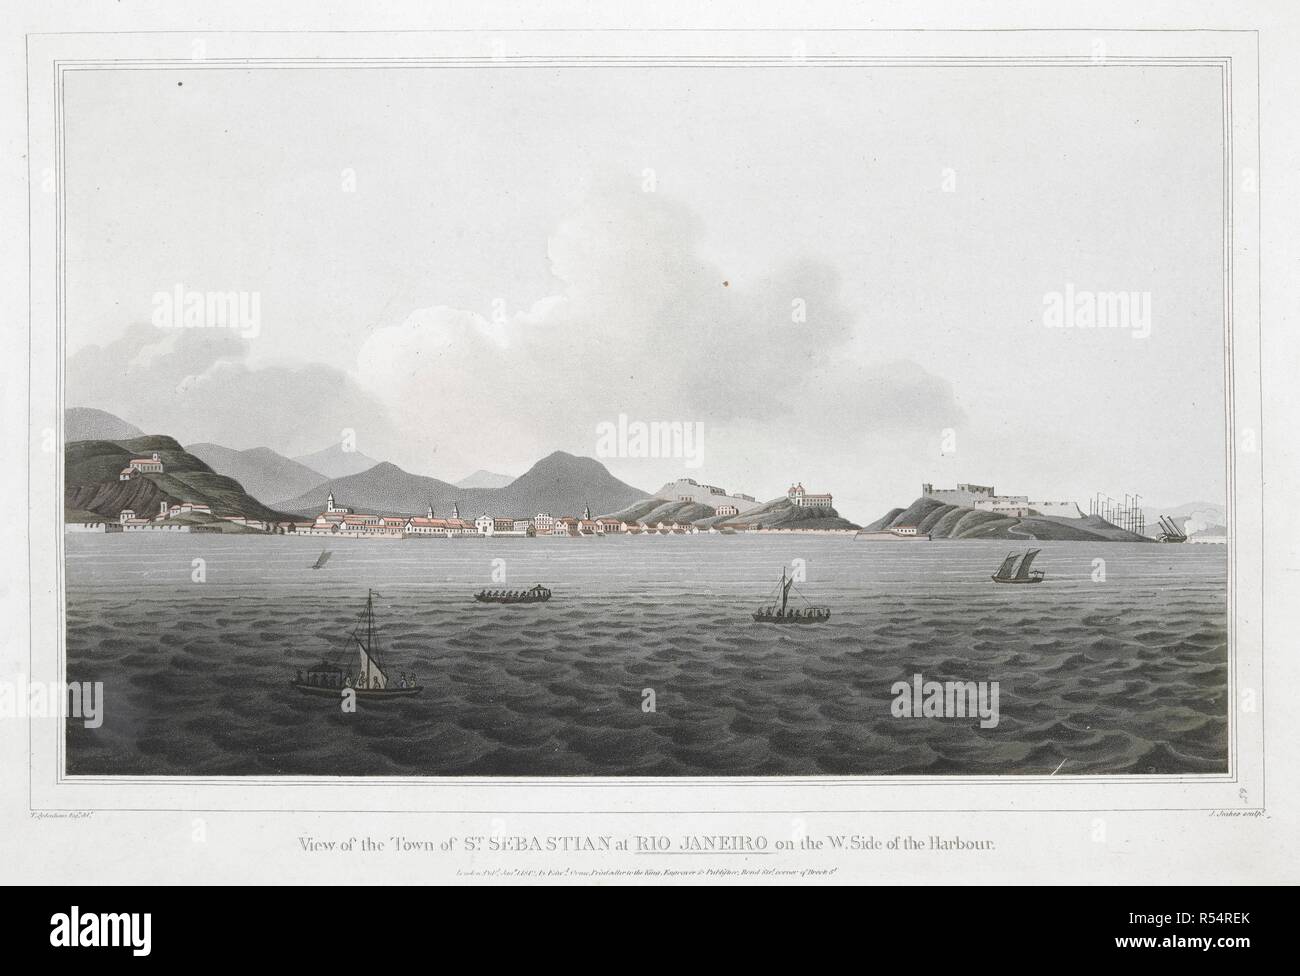 Boats and sailing ships on Guanabara Bay in the foreground, with the city of Rio de Janeiro by the sea in the middle, fortifications and the harbour on the right and the mountains of Sierra del Mar in the background . View of the Town of ST. SEBASTIAN at RIO JANEIRO on the W. Side of the Harbour. London : Pubd. Jan.y 1. 1812. by Edw.d Orme, Printseller to the King. Engraver & Publisher, Bond Str.t corner of Brook St., [January 1 1812]. Hand-coloured aquatint and etching. Source: Maps K.Top.124.59.a. Language: English. Author: Jeakes, J. Stock Photo